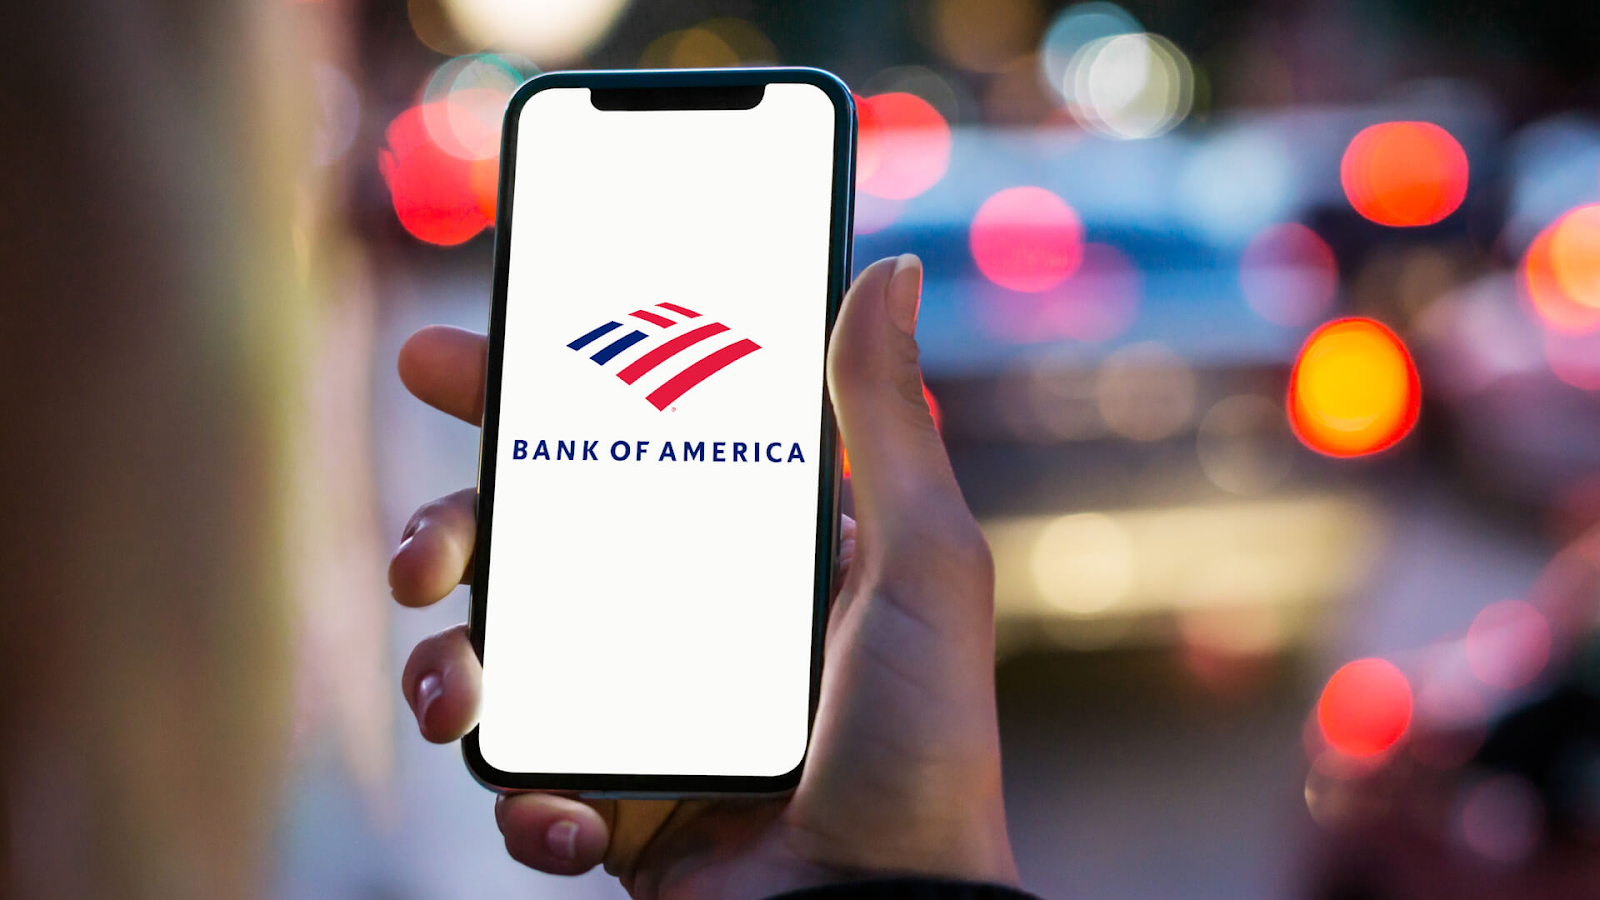 Bank of America Mobile Banking - Learn How to Download